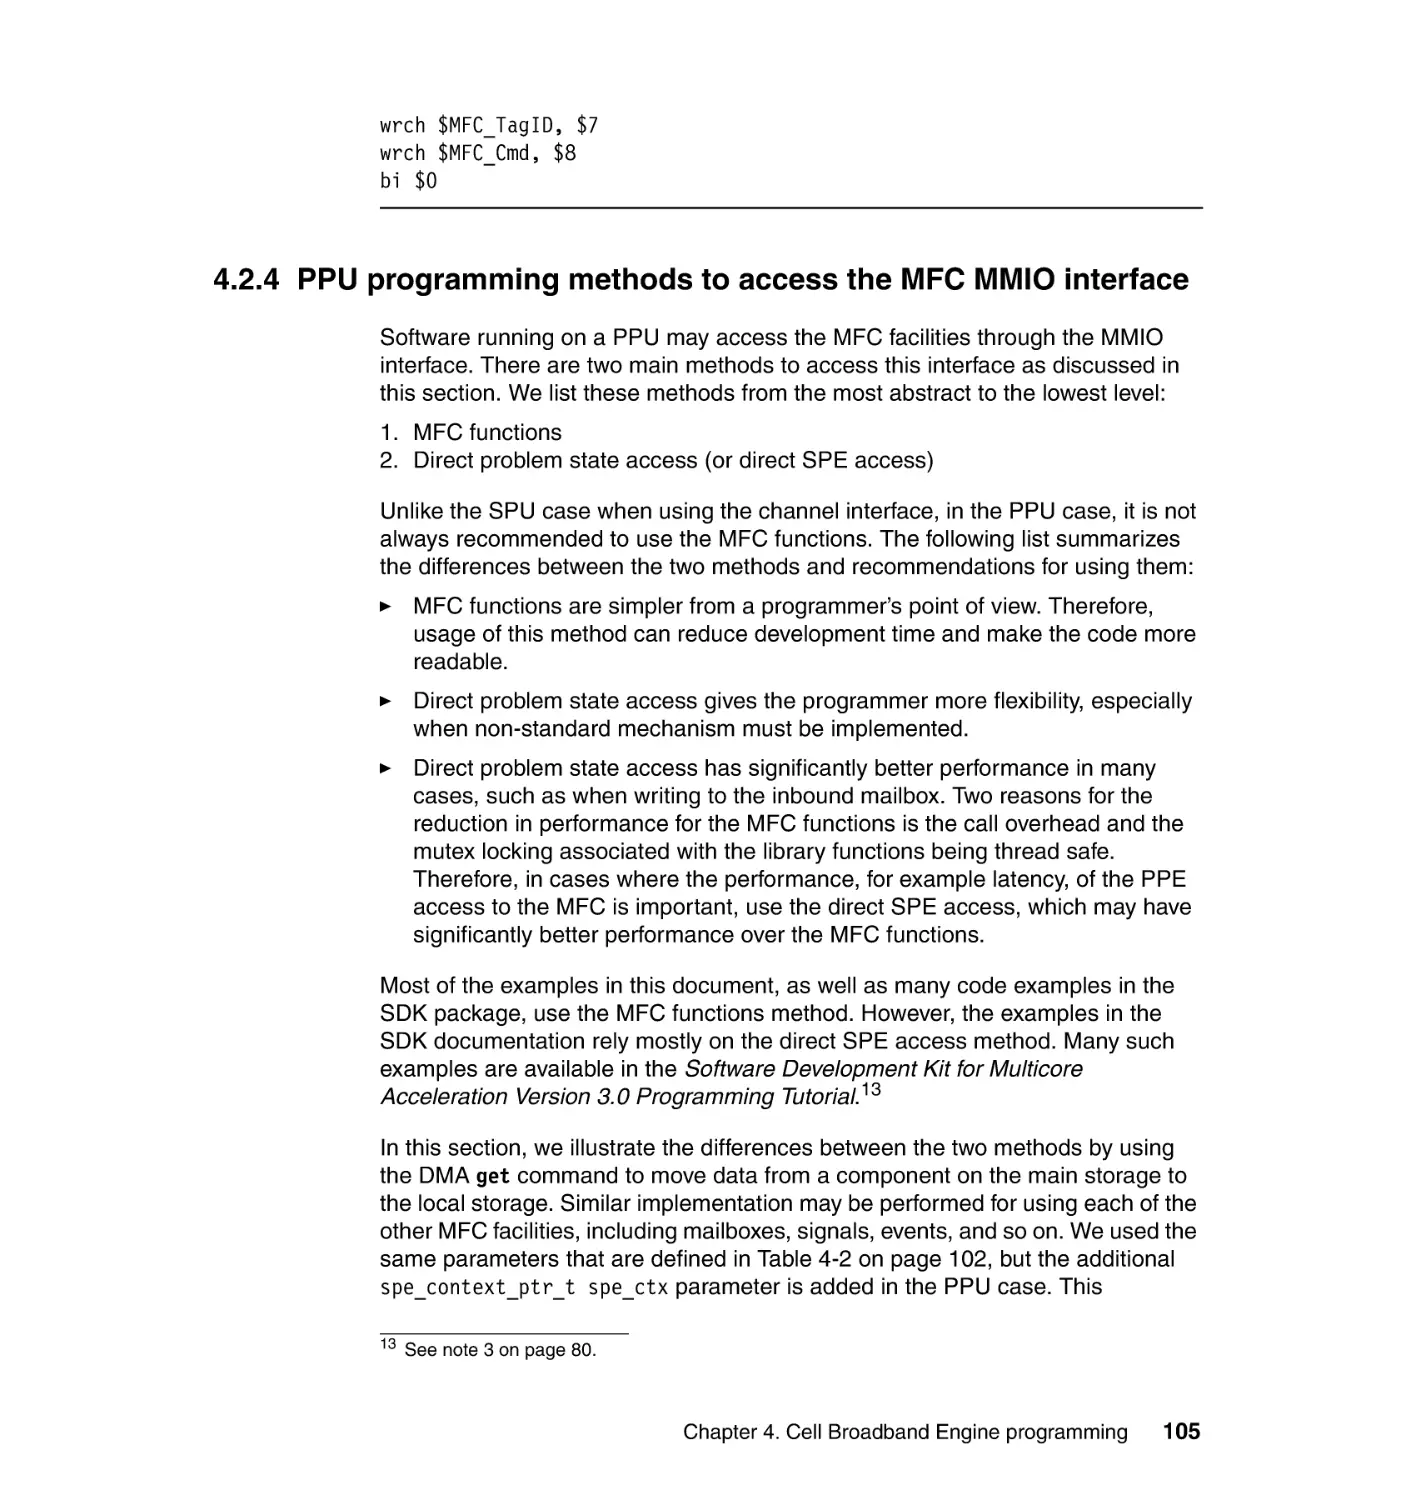 4.2.4 PPU programming methods to access the MFC MMIO interface